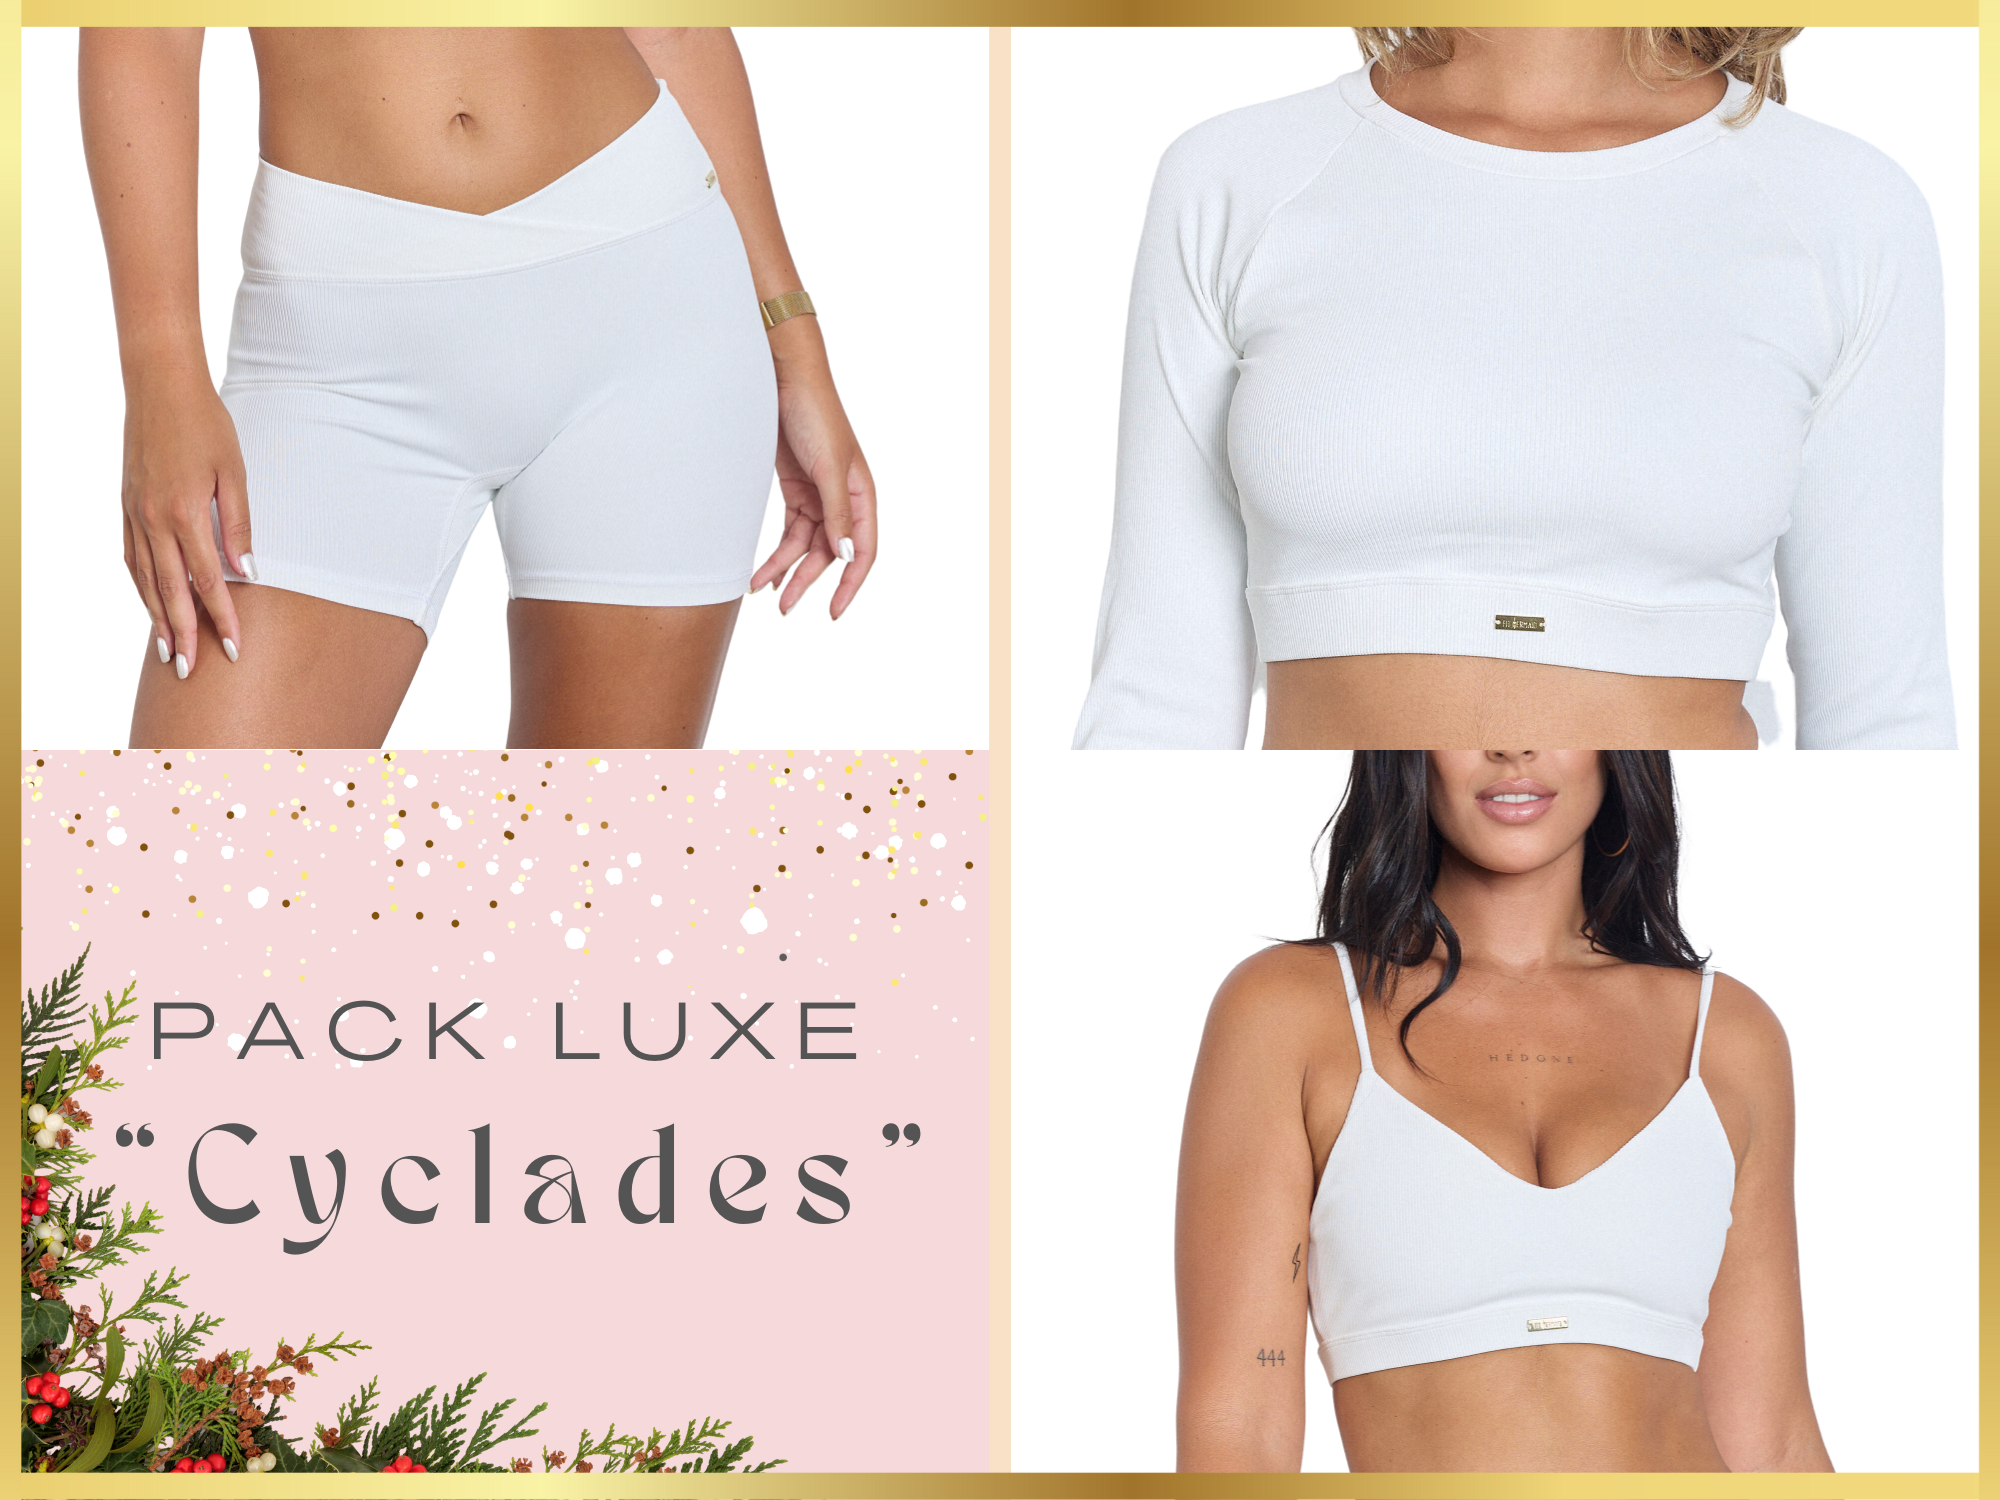 PACK LUXE "CYCLADES"